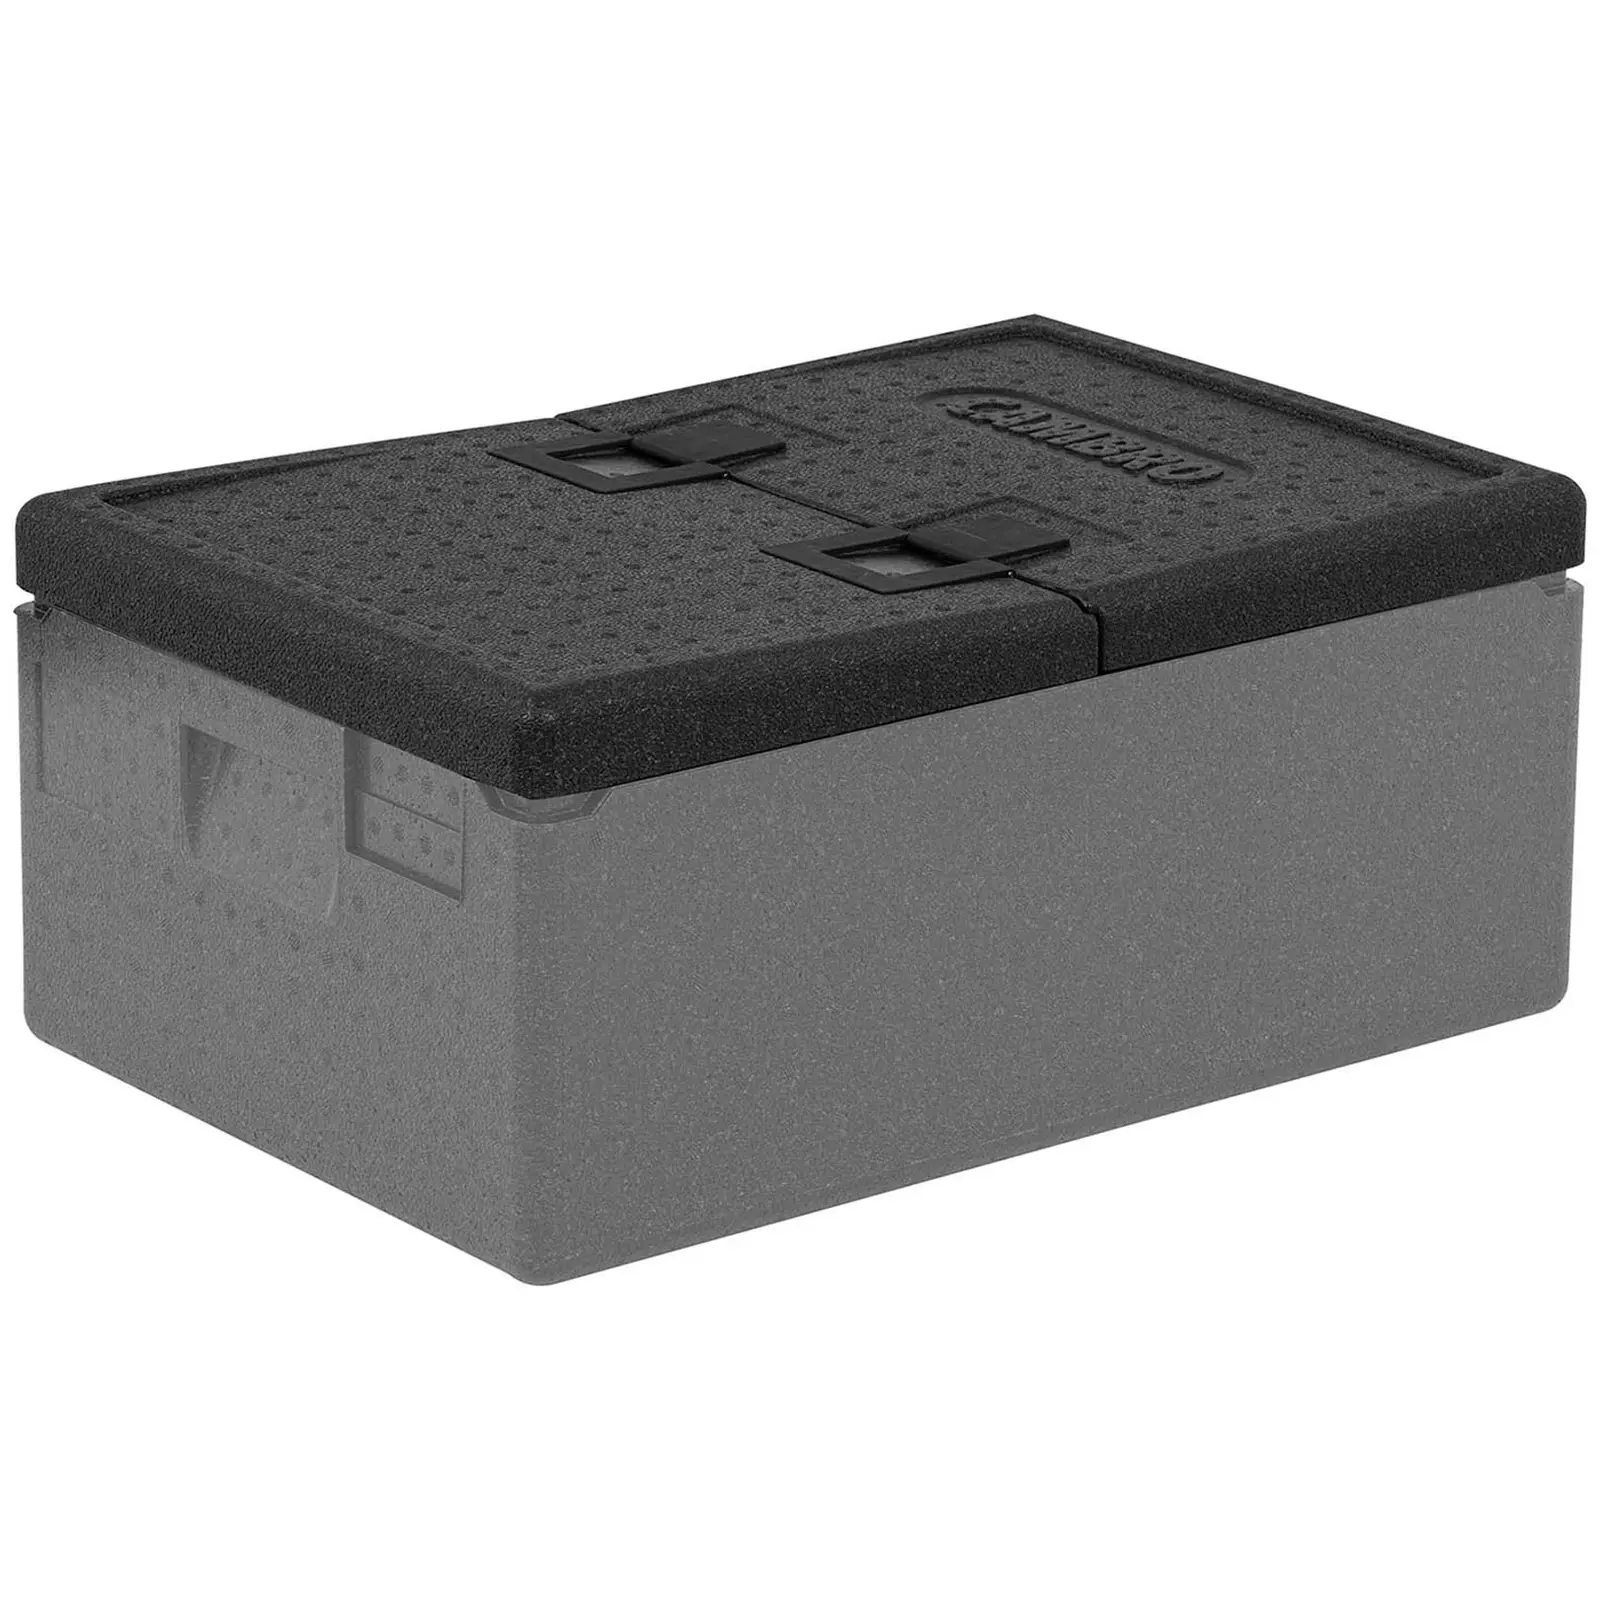 Thermobox lid - foldable